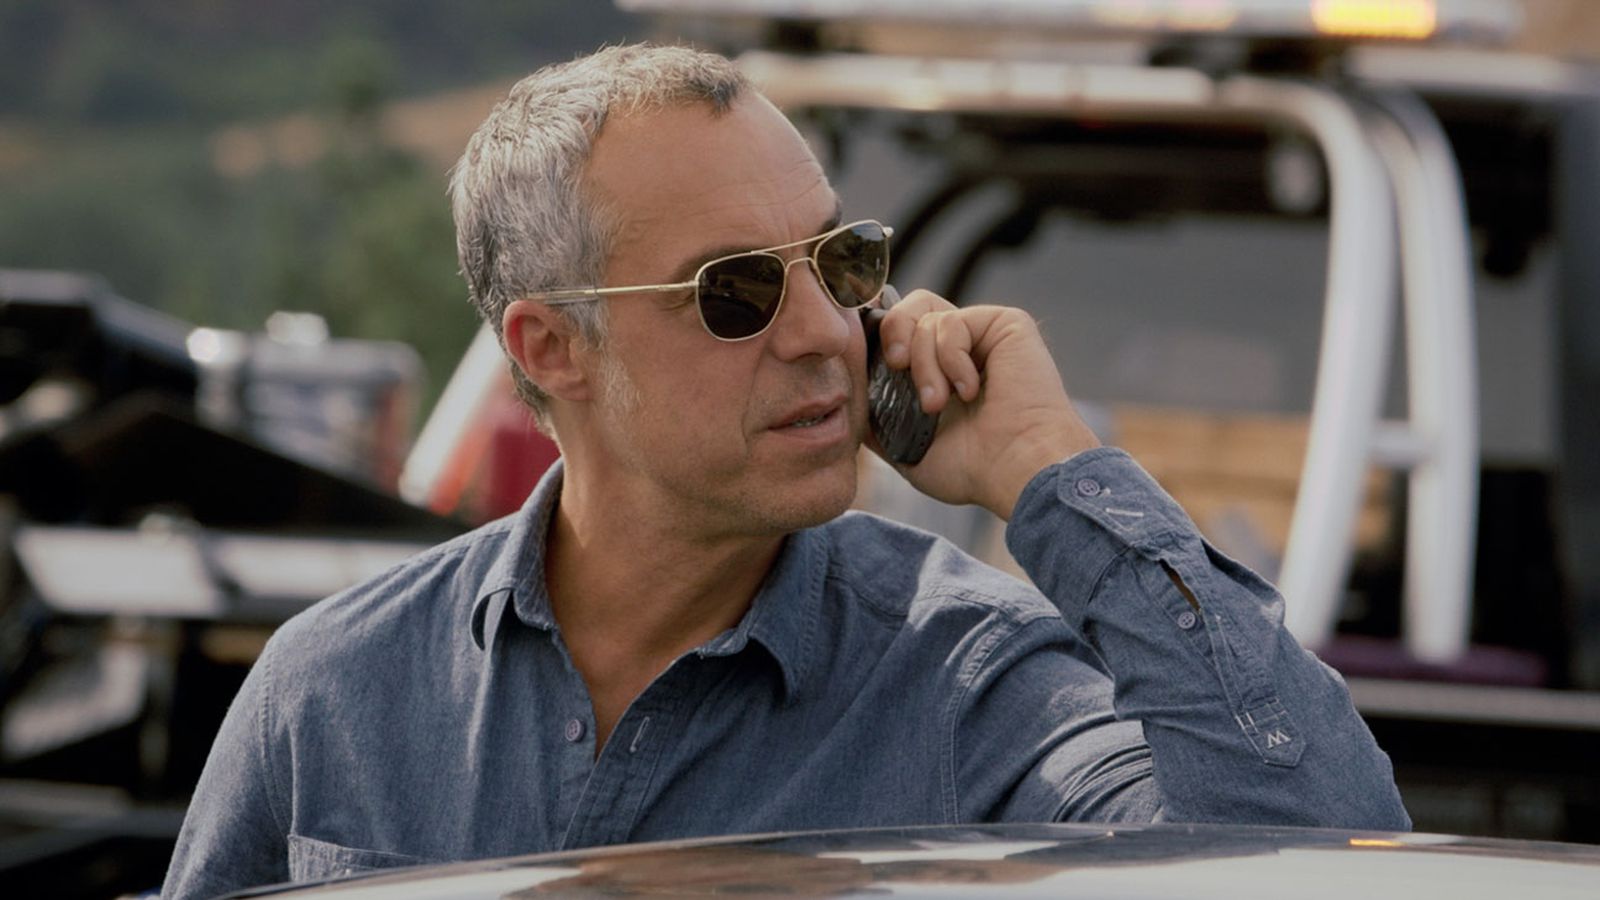 Bosch isn’t great TV, but that’s why it might be the hit Amazon desperately needs